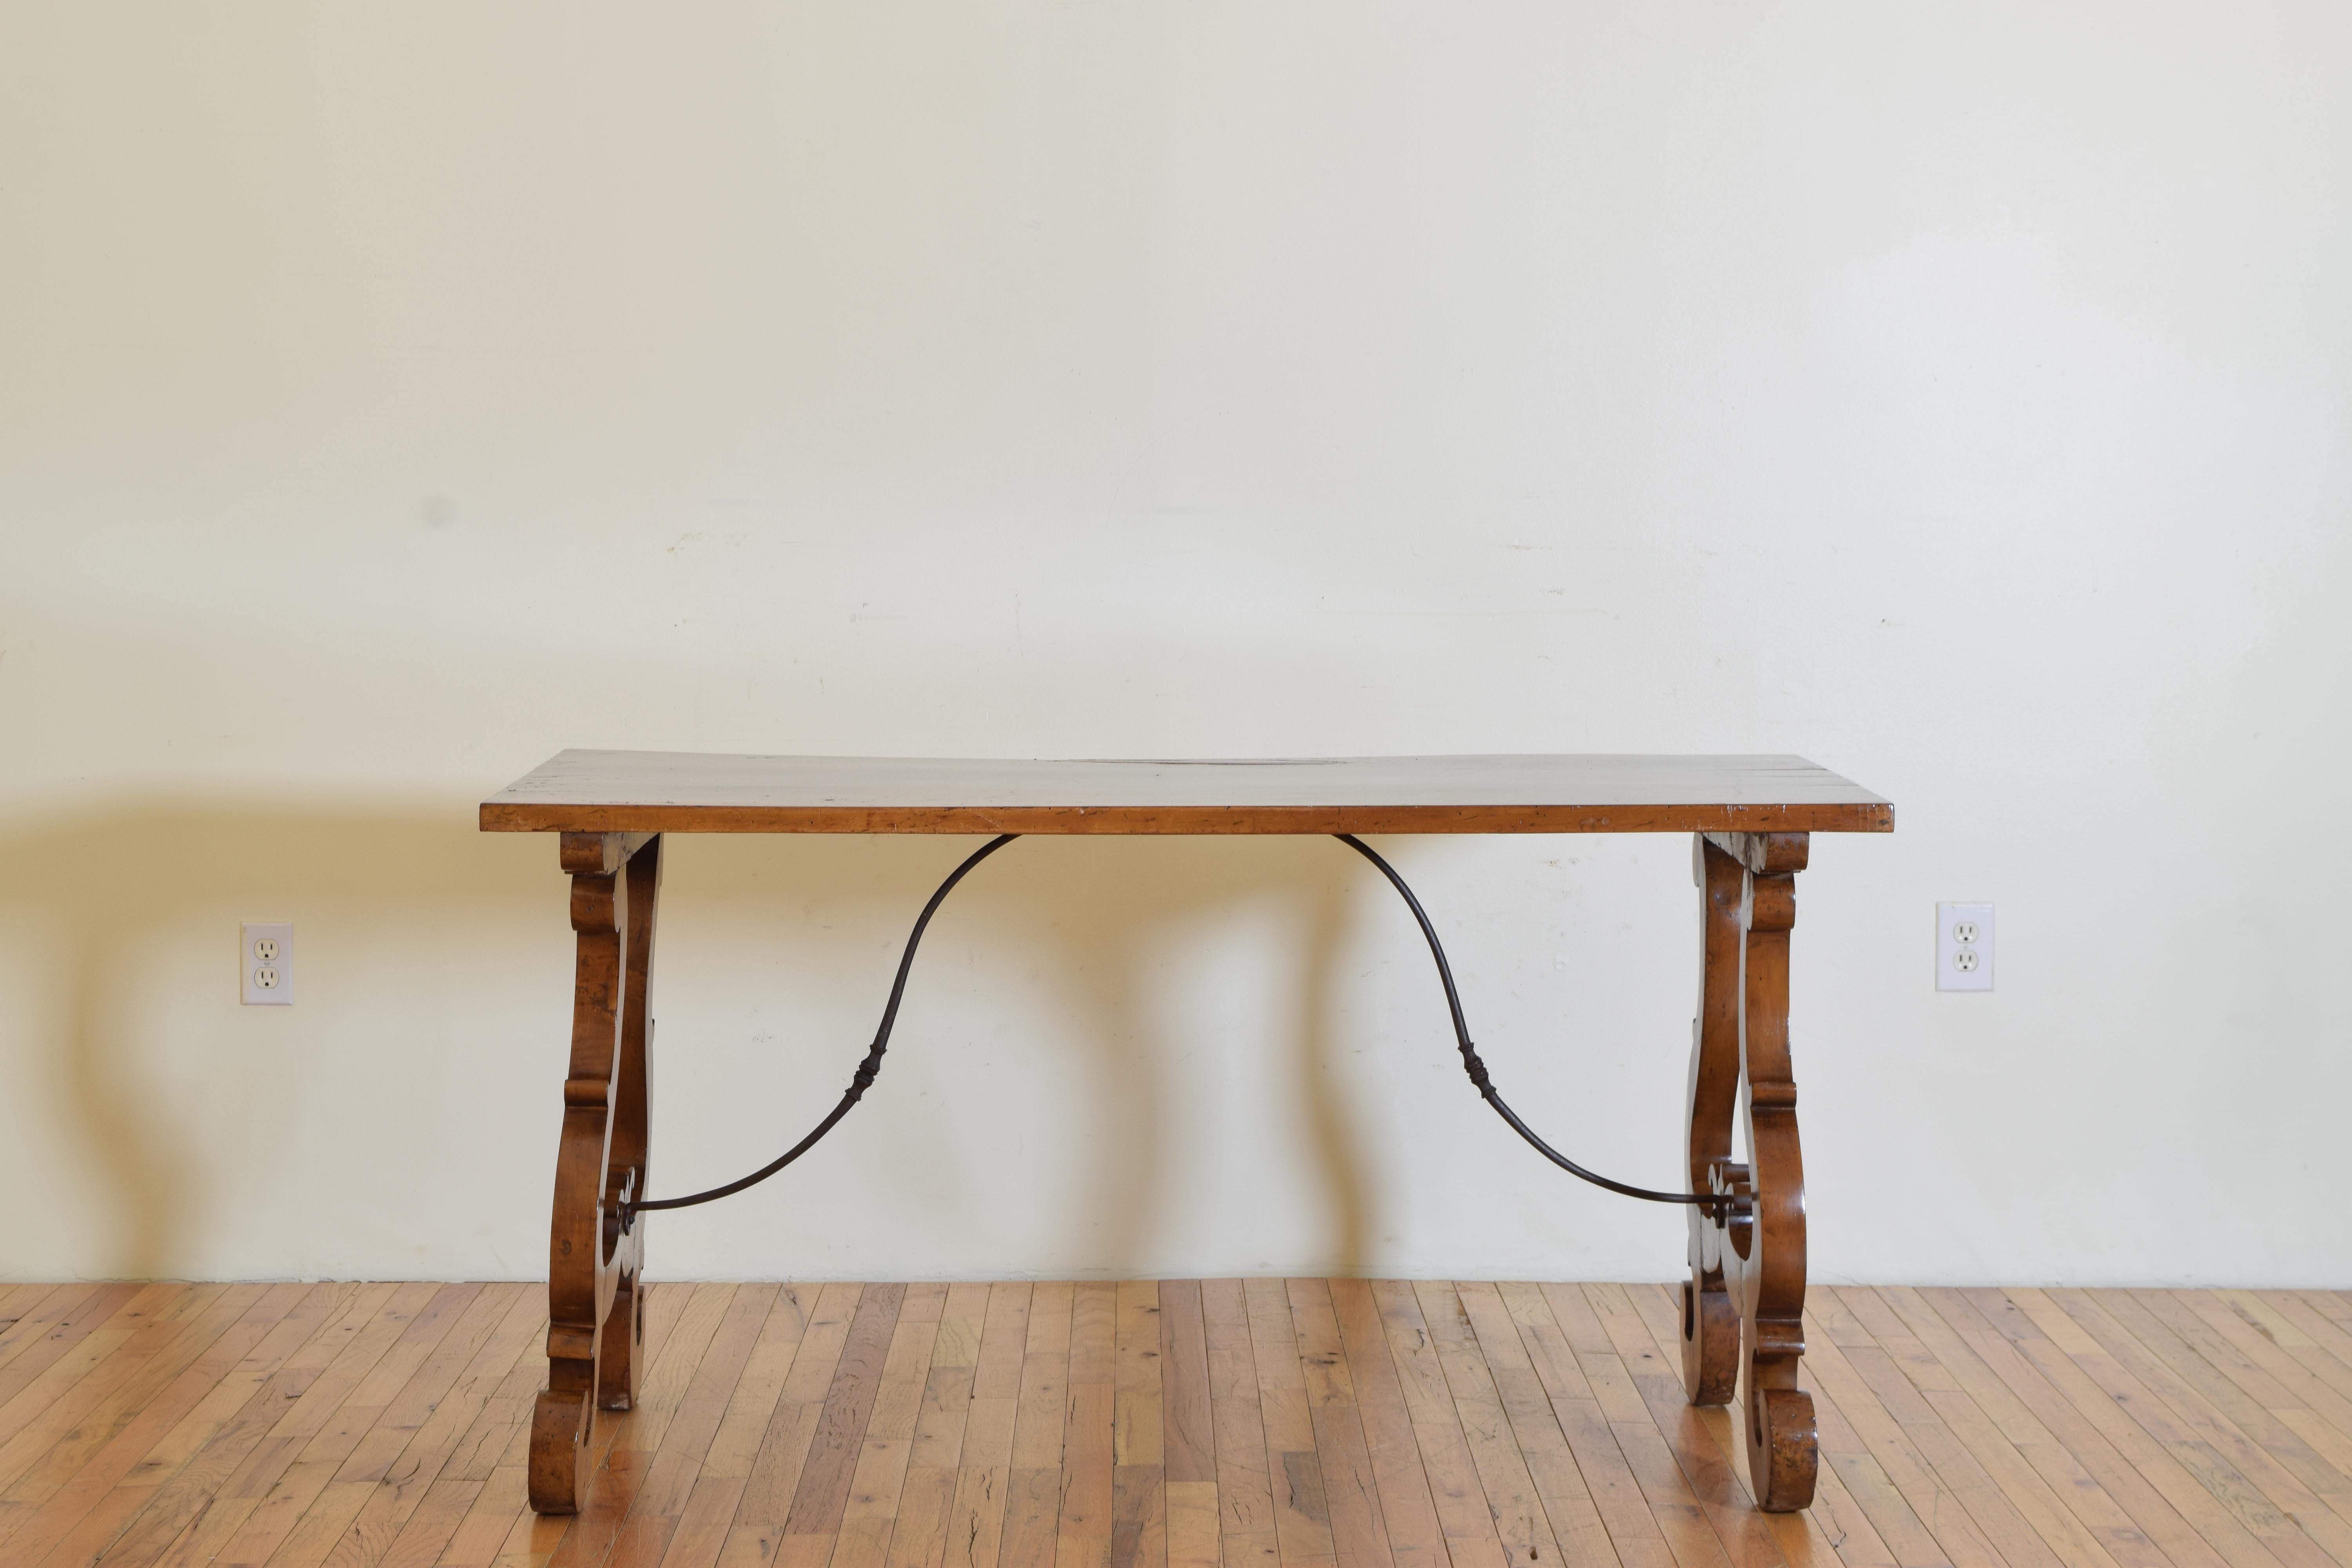 Italian, Toscana, Pearwood & Iron Center or Dining Table, 17th/18th Century In Good Condition For Sale In Atlanta, GA